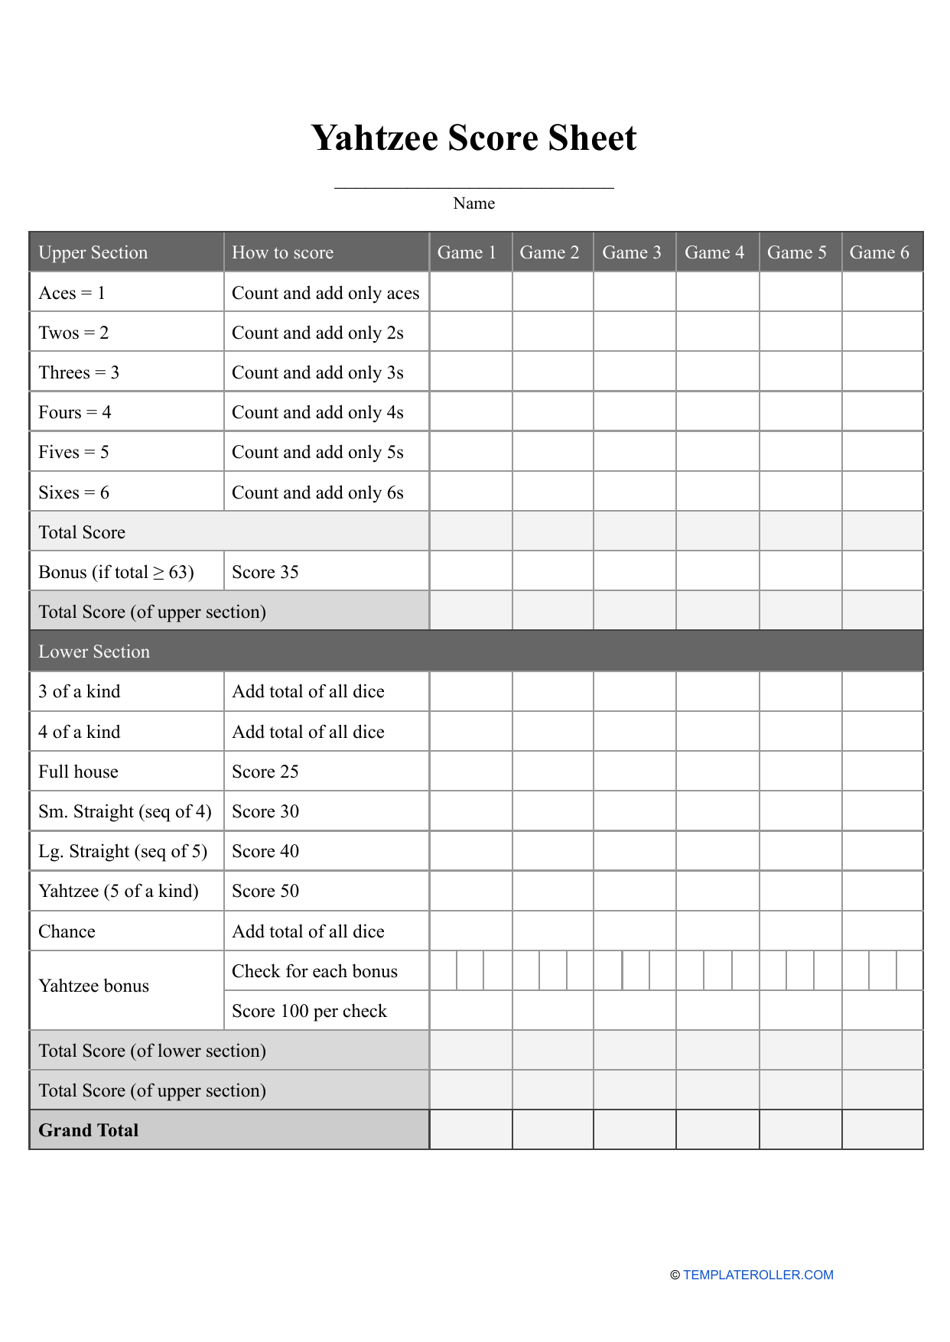 A preview of the Yahtzee score sheet template